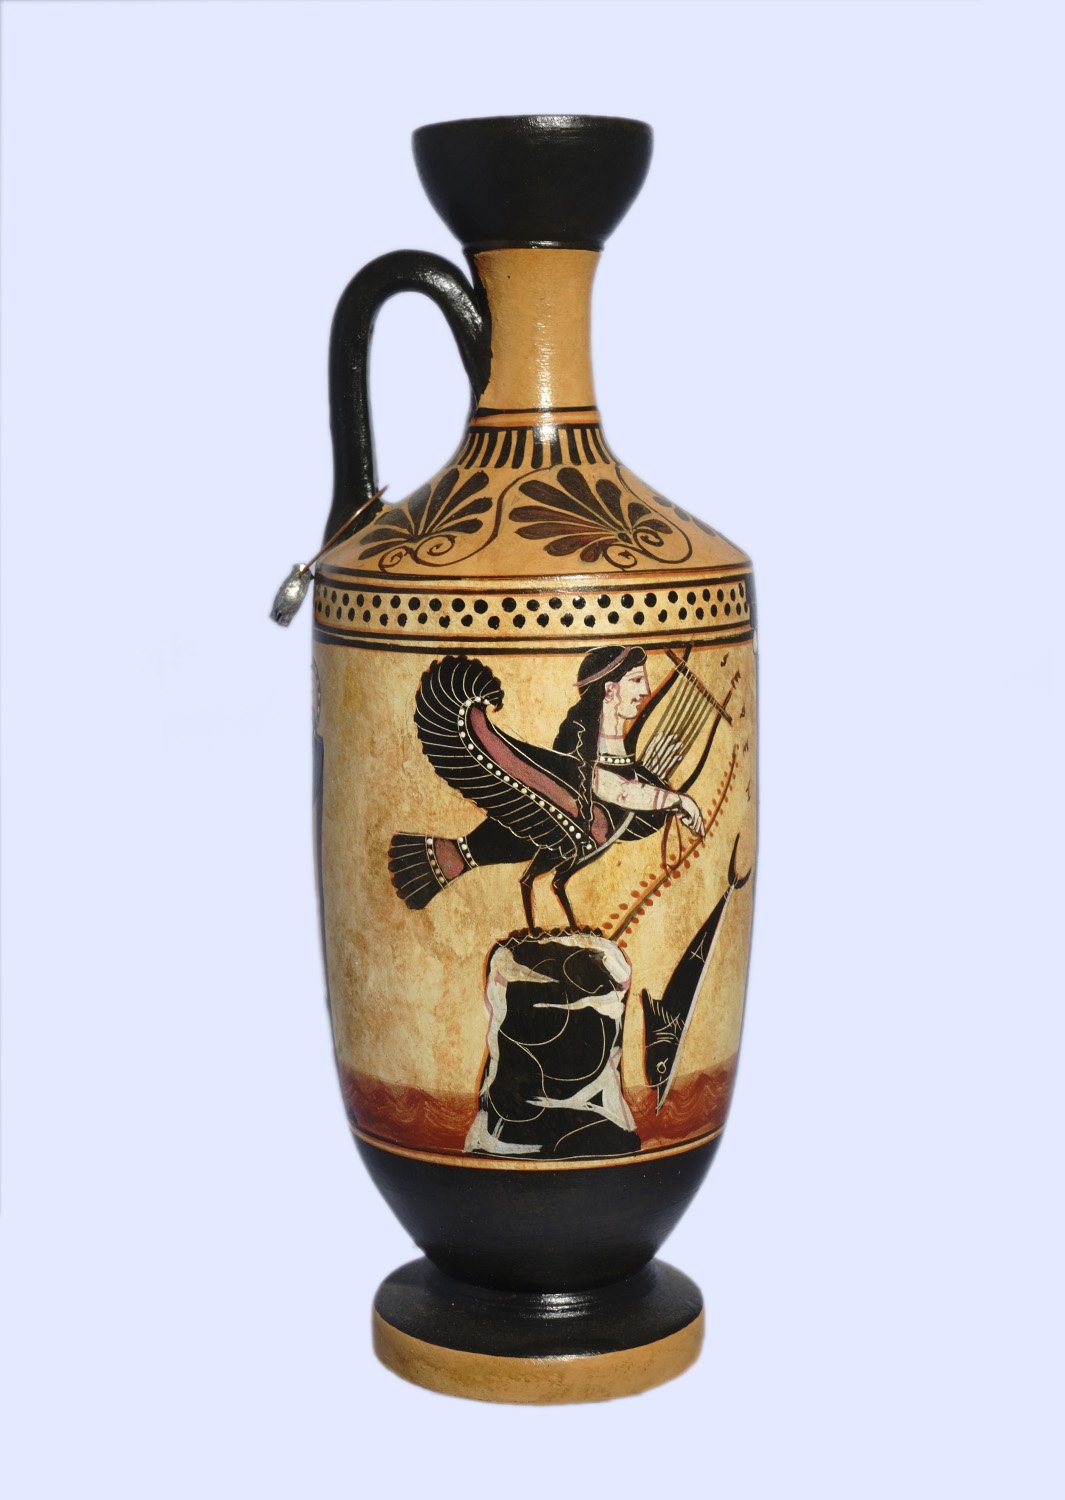 Archaic black-figure lekythos with Odysseus and the Sirens 